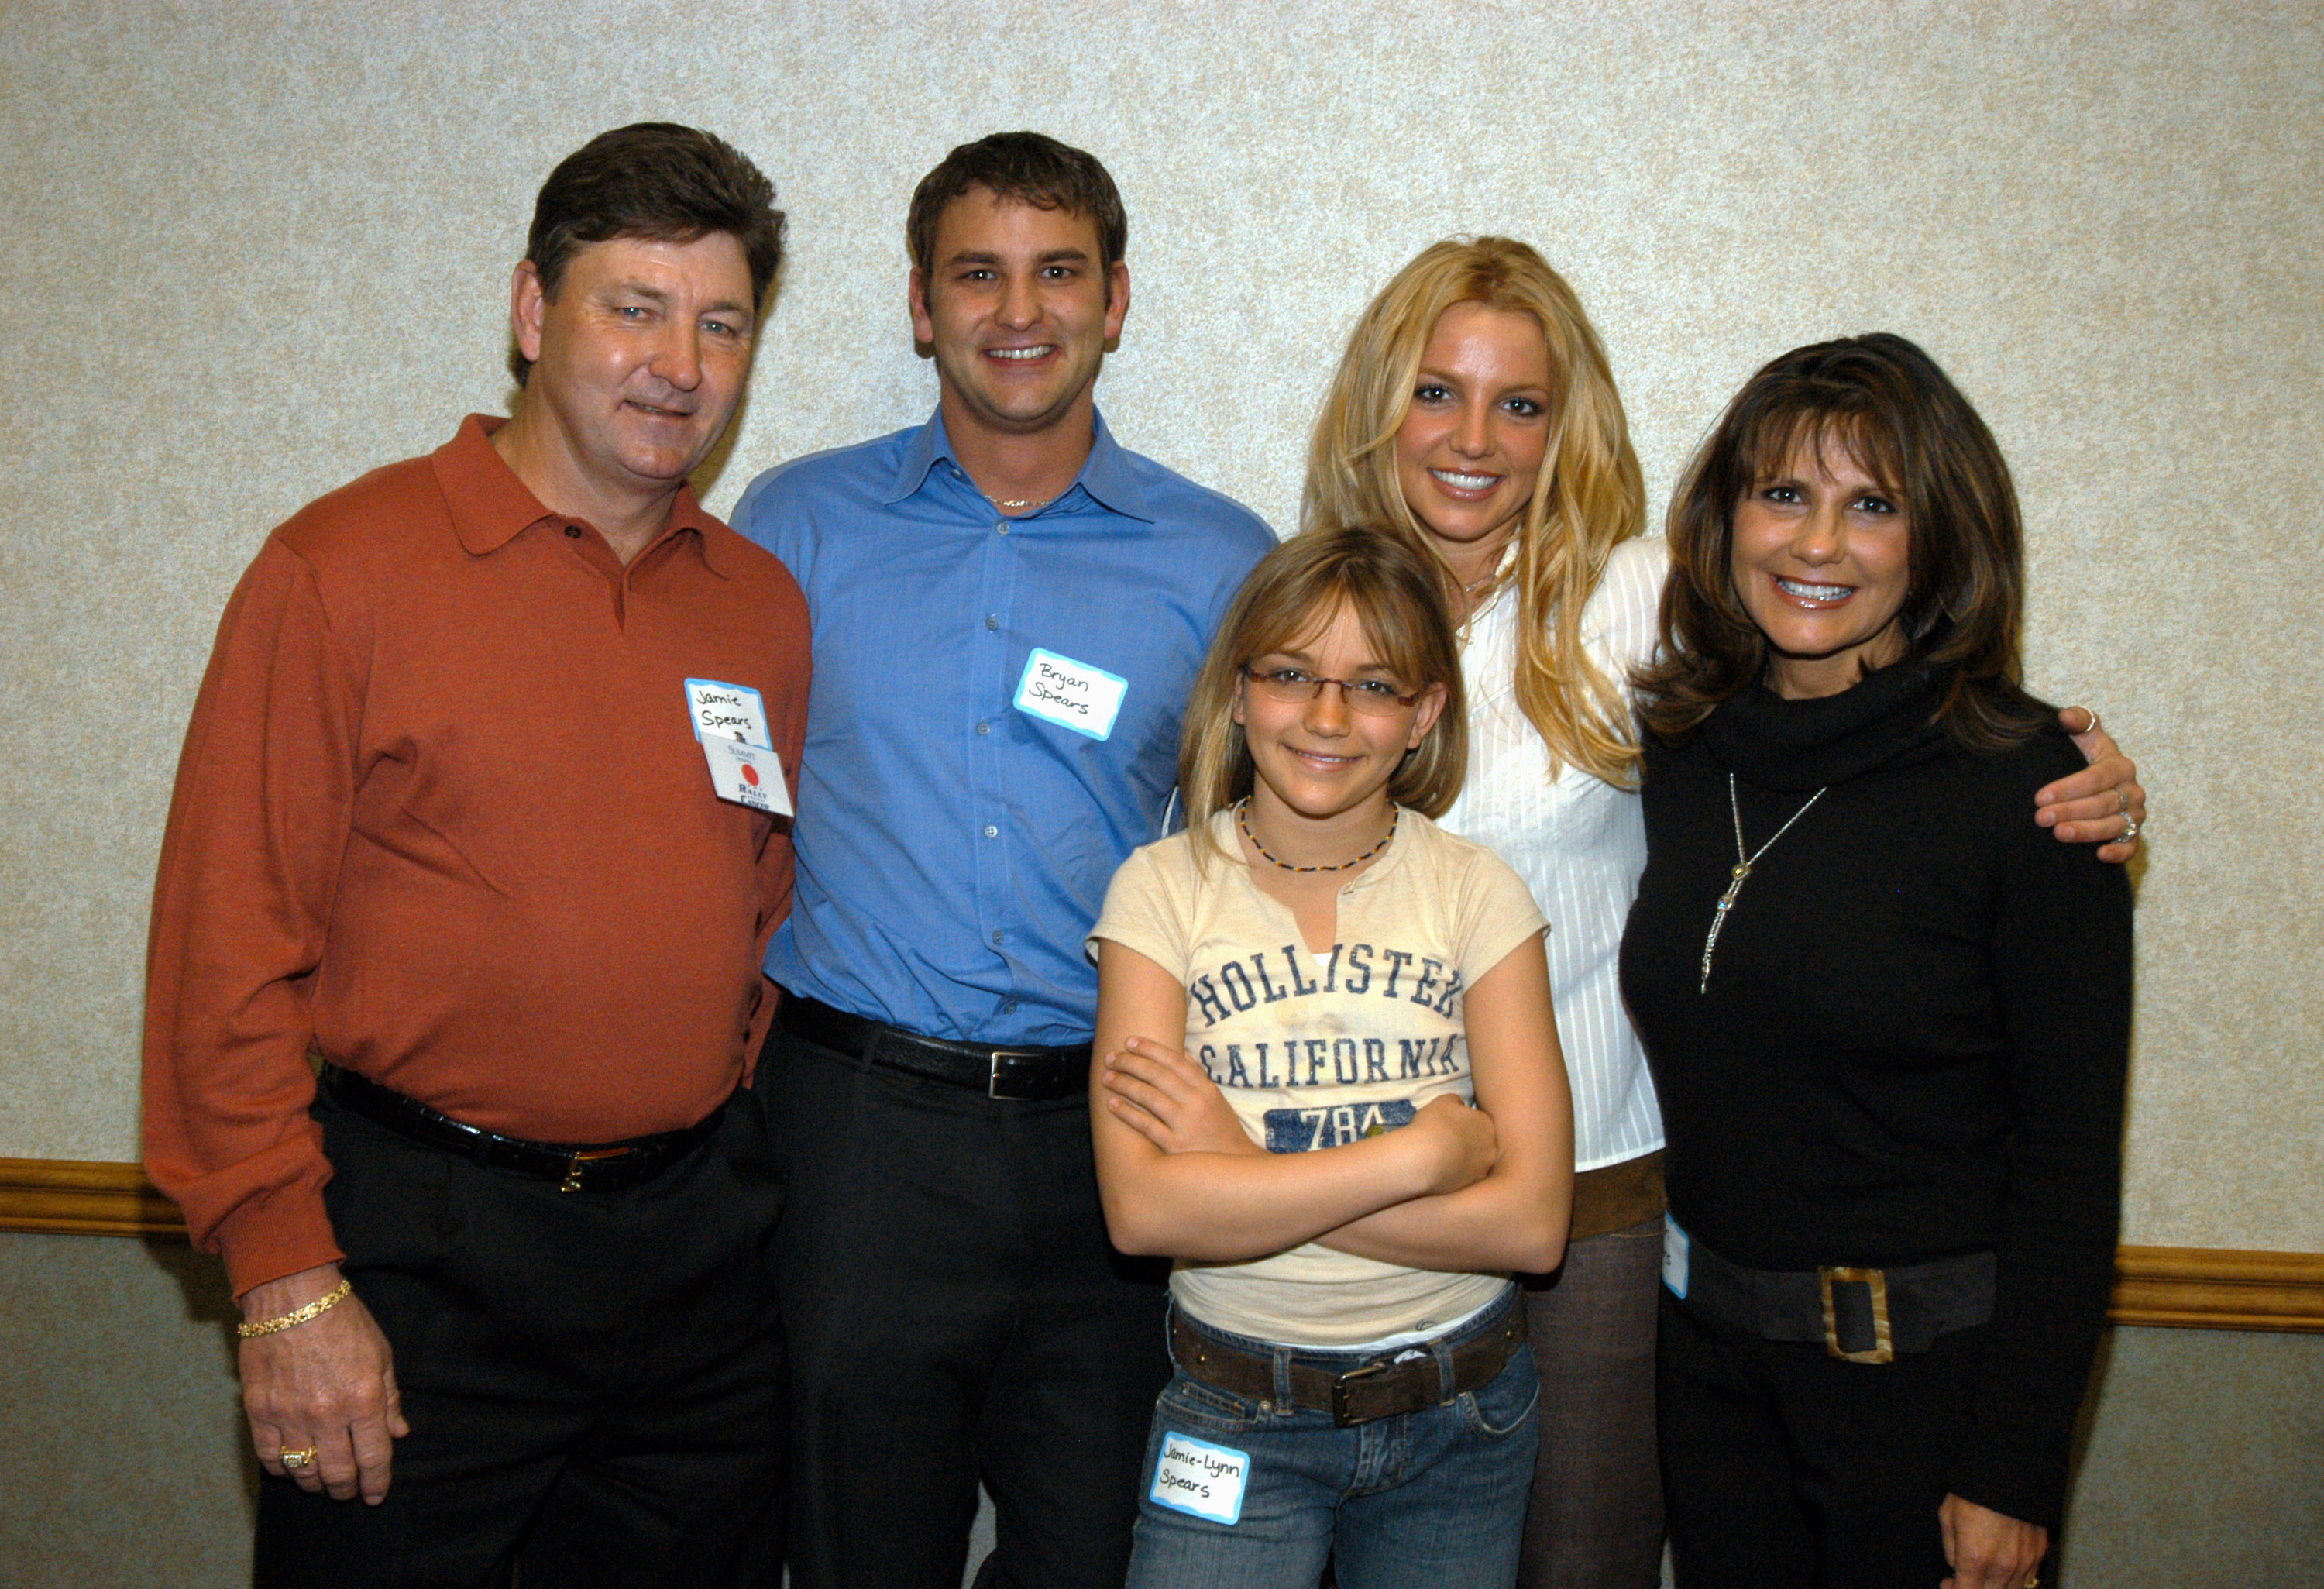 Britney Spears's family: Jamie Spears, Bryan Spears, Jamie-Lynn Spears, Britney Spears, and Lynne Spears in Baton Rouge on March 2, 2003 | Source: Getty Images